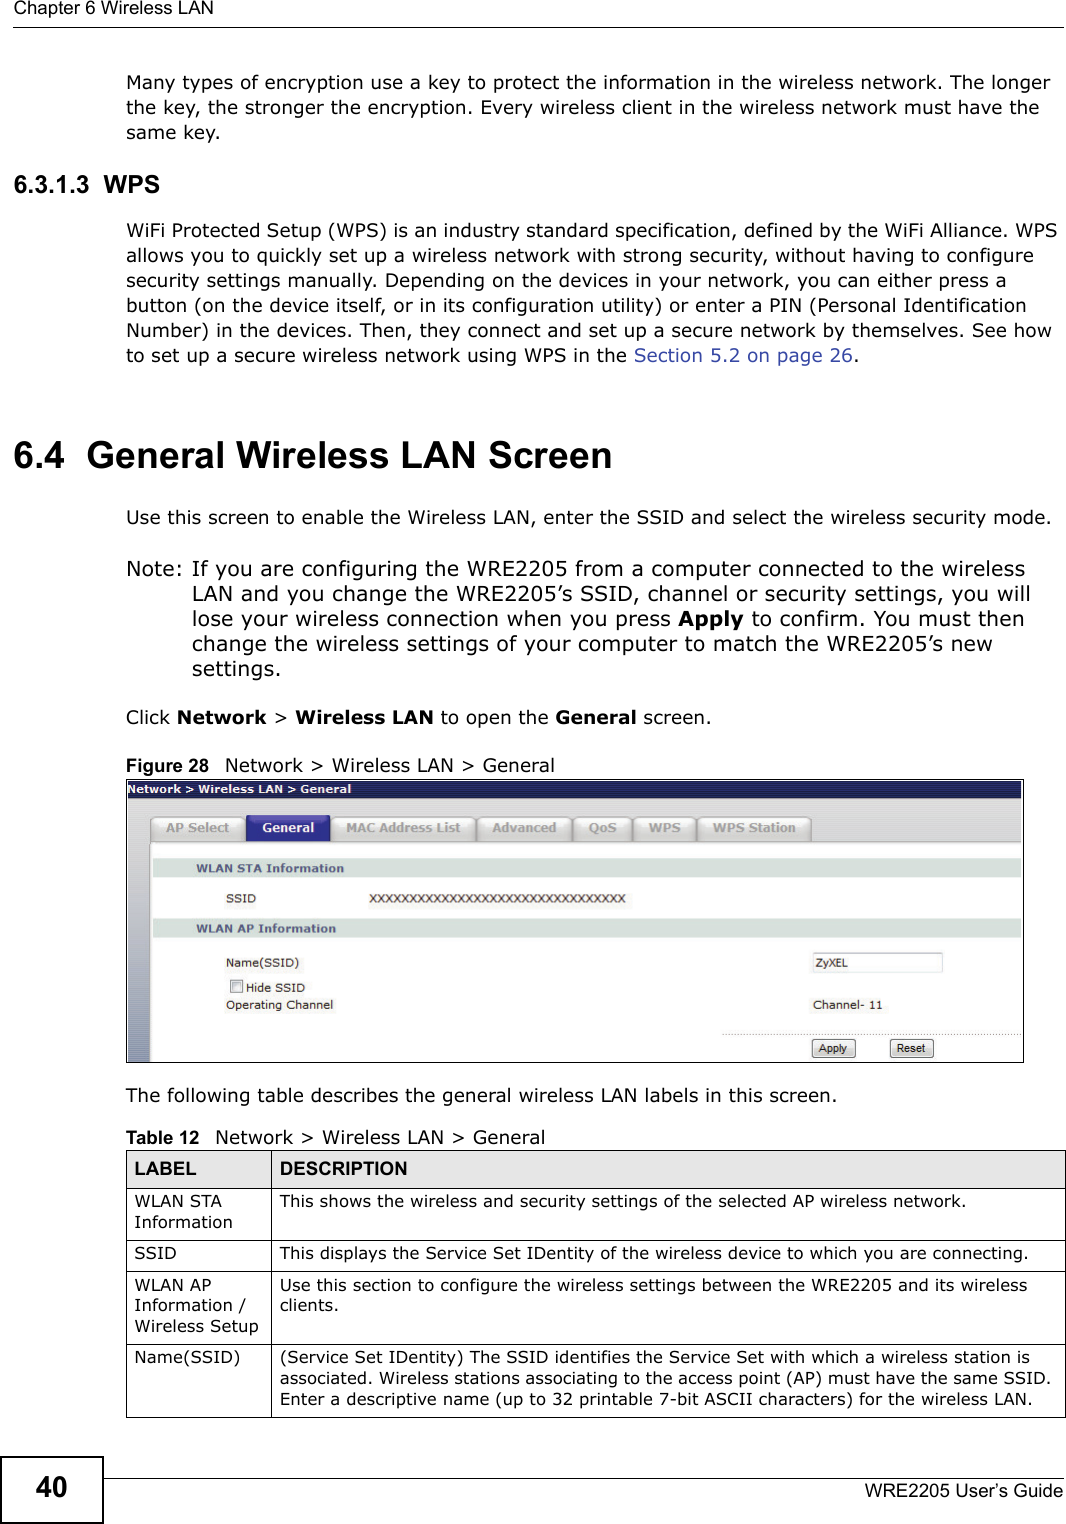 Chapter 6 Wireless LANWRE2205 User’s Guide40Many types of encryption use a key to protect the information in the wireless network. The longer the key, the stronger the encryption. Every wireless client in the wireless network must have the same key.6.3.1.3  WPSWiFi Protected Setup (WPS) is an industry standard specification, defined by the WiFi Alliance. WPS allows you to quickly set up a wireless network with strong security, without having to configure security settings manually. Depending on the devices in your network, you can either press a button (on the device itself, or in its configuration utility) or enter a PIN (Personal Identification Number) in the devices. Then, they connect and set up a secure network by themselves. See how to set up a secure wireless network using WPS in the Section 5.2 on page 26. 6.4  General Wireless LAN Screen Use this screen to enable the Wireless LAN, enter the SSID and select the wireless security mode.Note: If you are configuring the WRE2205 from a computer connected to the wireless LAN and you change the WRE2205’s SSID, channel or security settings, you will lose your wireless connection when you press Apply to confirm. You must then change the wireless settings of your computer to match the WRE2205’s new settings.Click Network &gt; Wireless LAN to open the General screen.Figure 28   Network &gt; Wireless LAN &gt; General The following table describes the general wireless LAN labels in this screen.Table 12   Network &gt; Wireless LAN &gt; GeneralLABEL DESCRIPTIONWLAN STA InformationThis shows the wireless and security settings of the selected AP wireless network.SSID This displays the Service Set IDentity of the wireless device to which you are connecting.WLAN AP Information / Wireless SetupUse this section to configure the wireless settings between the WRE2205 and its wireless clients.Name(SSID) (Service Set IDentity) The SSID identifies the Service Set with which a wireless station is associated. Wireless stations associating to the access point (AP) must have the same SSID. Enter a descriptive name (up to 32 printable 7-bit ASCII characters) for the wireless LAN. 